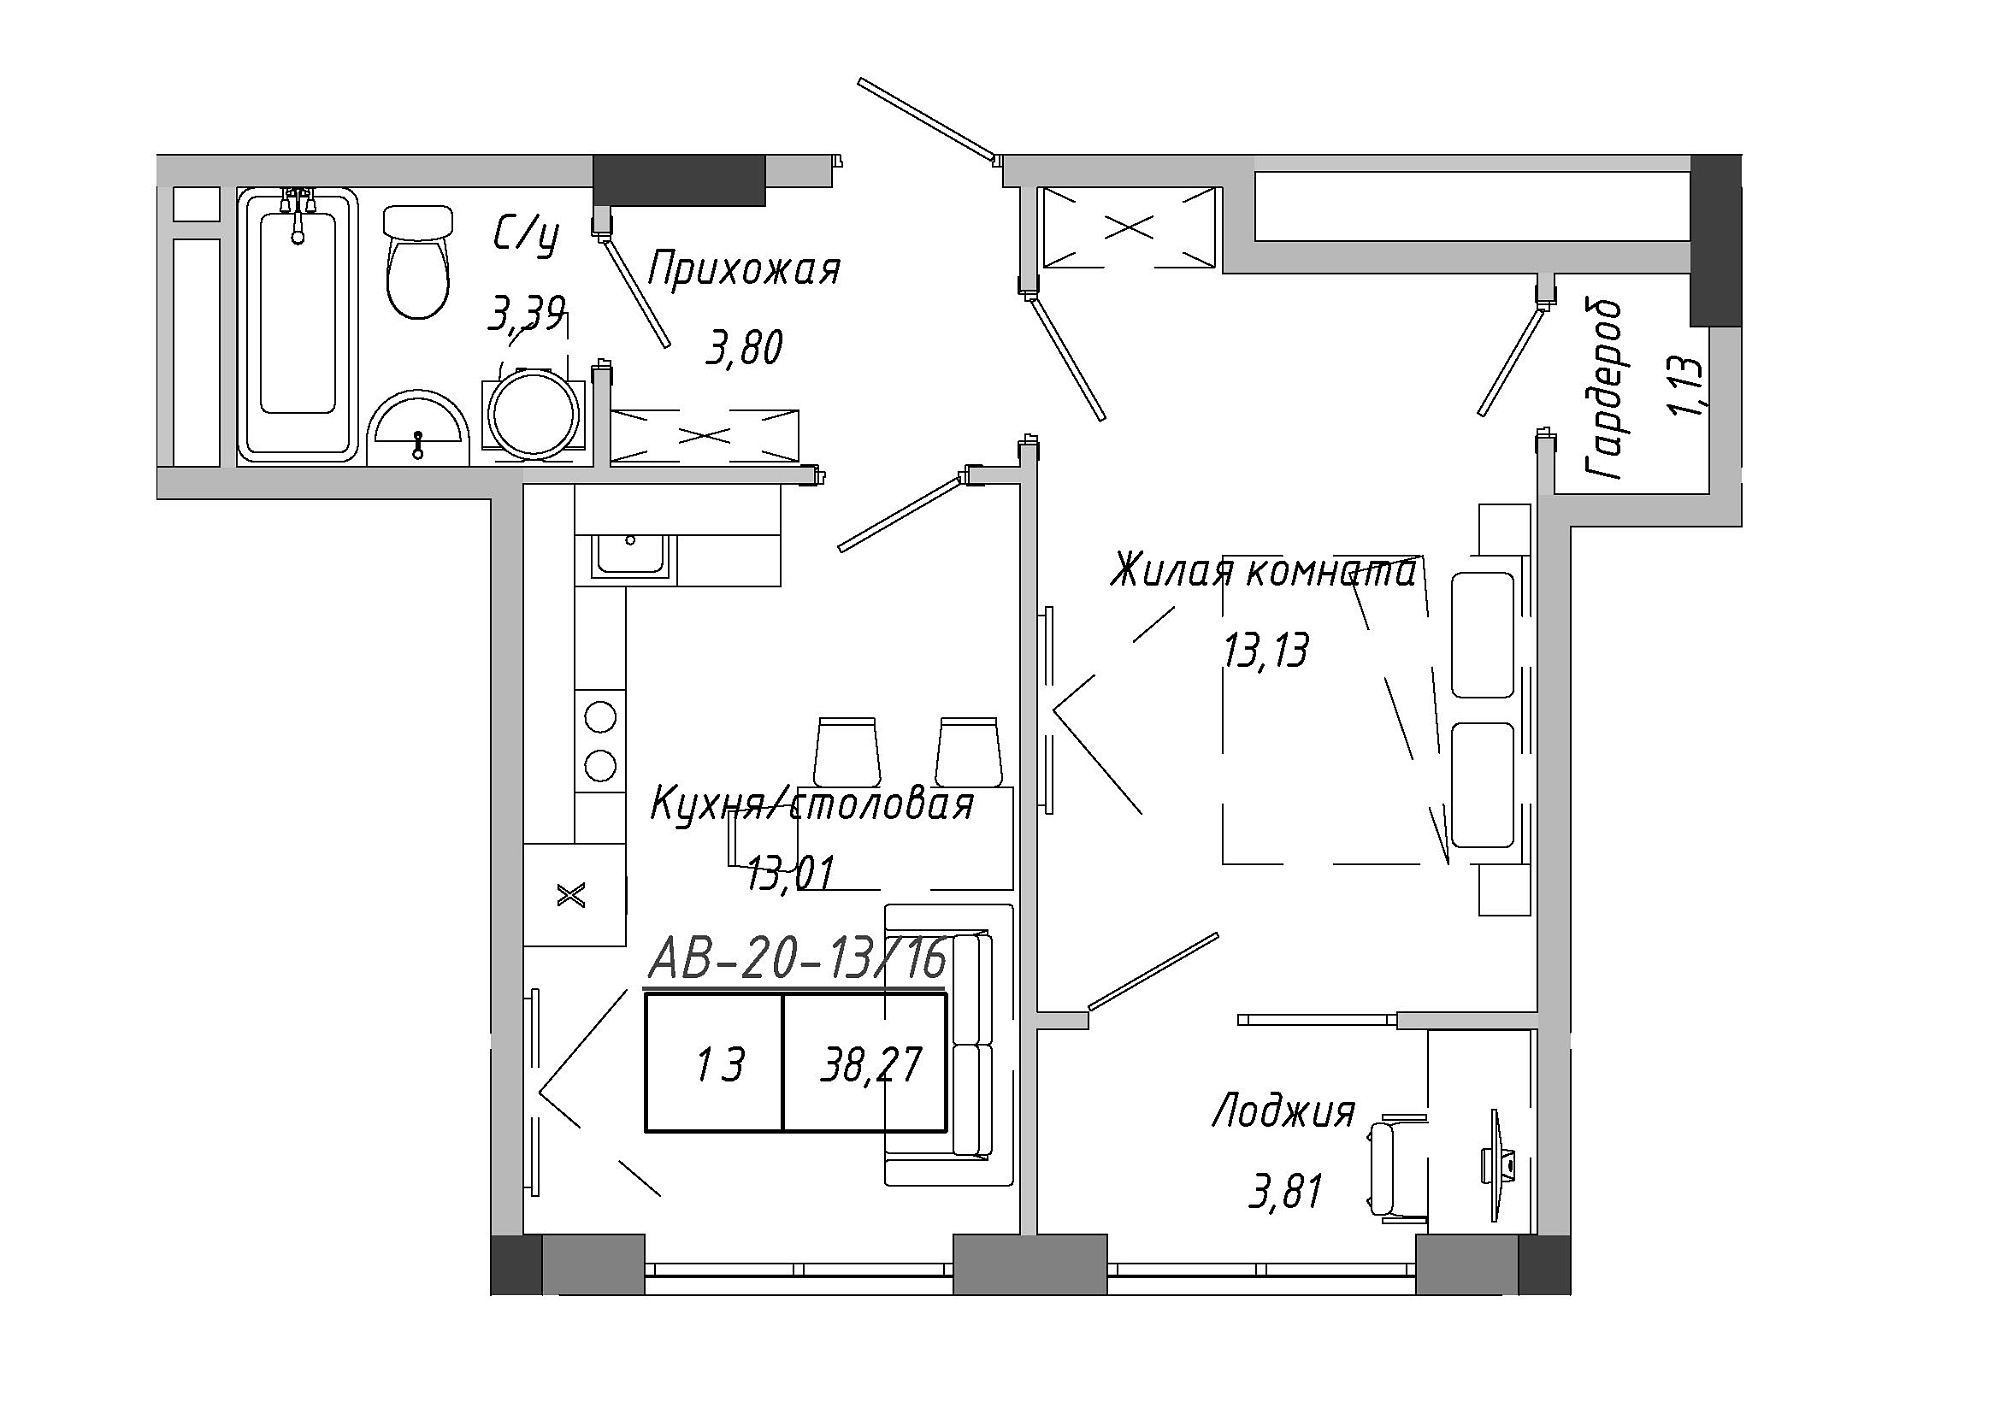 Planning 1-rm flats area 38.27m2, AB-20-13/00116.